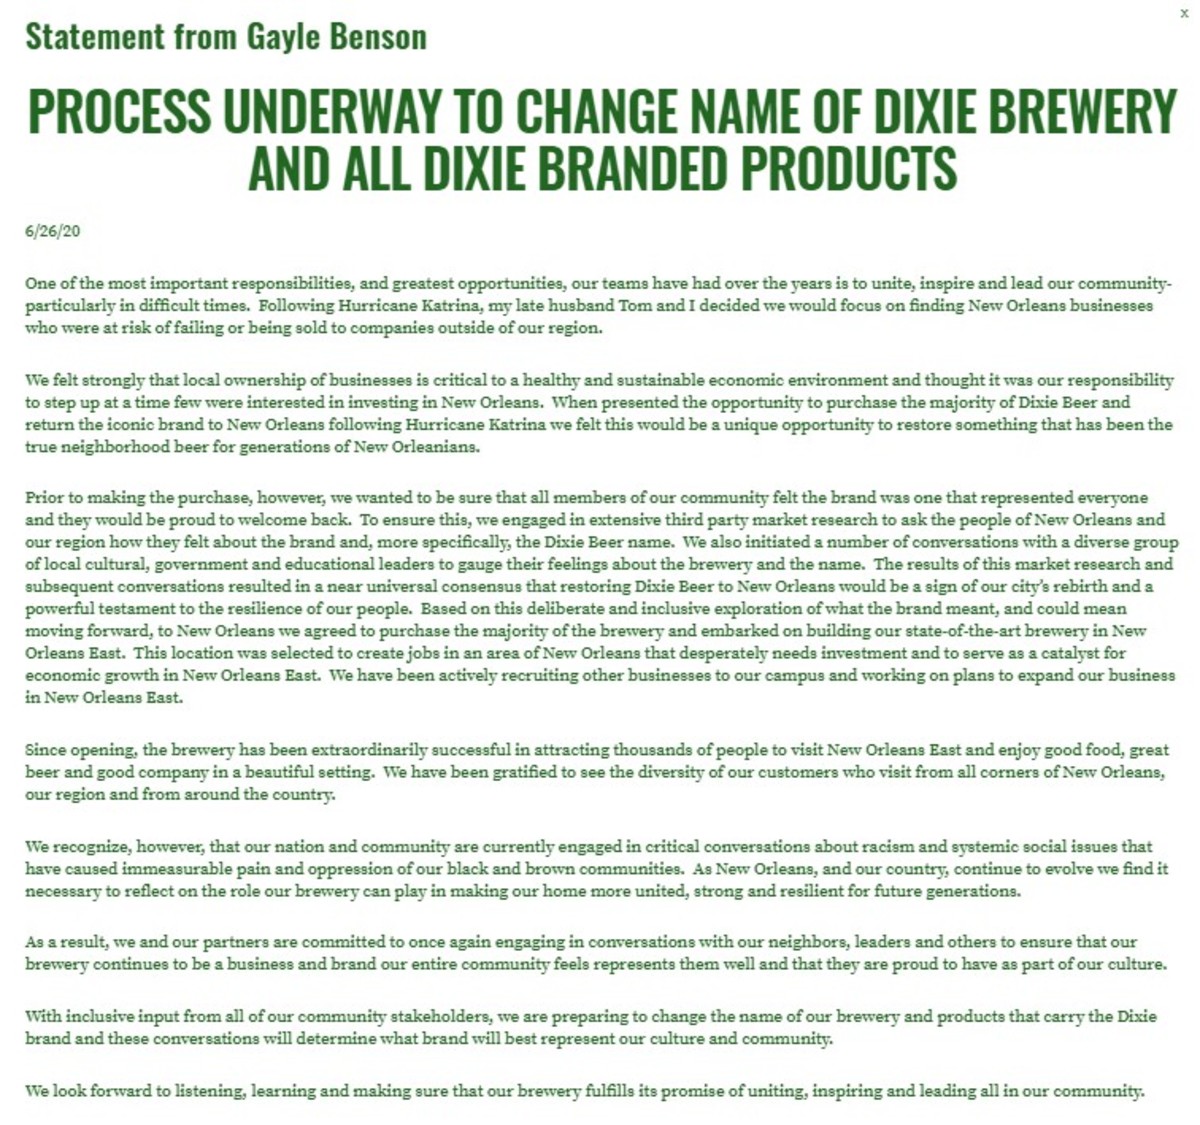 Gayle Benson Announcement on Dixie Beer Name Change